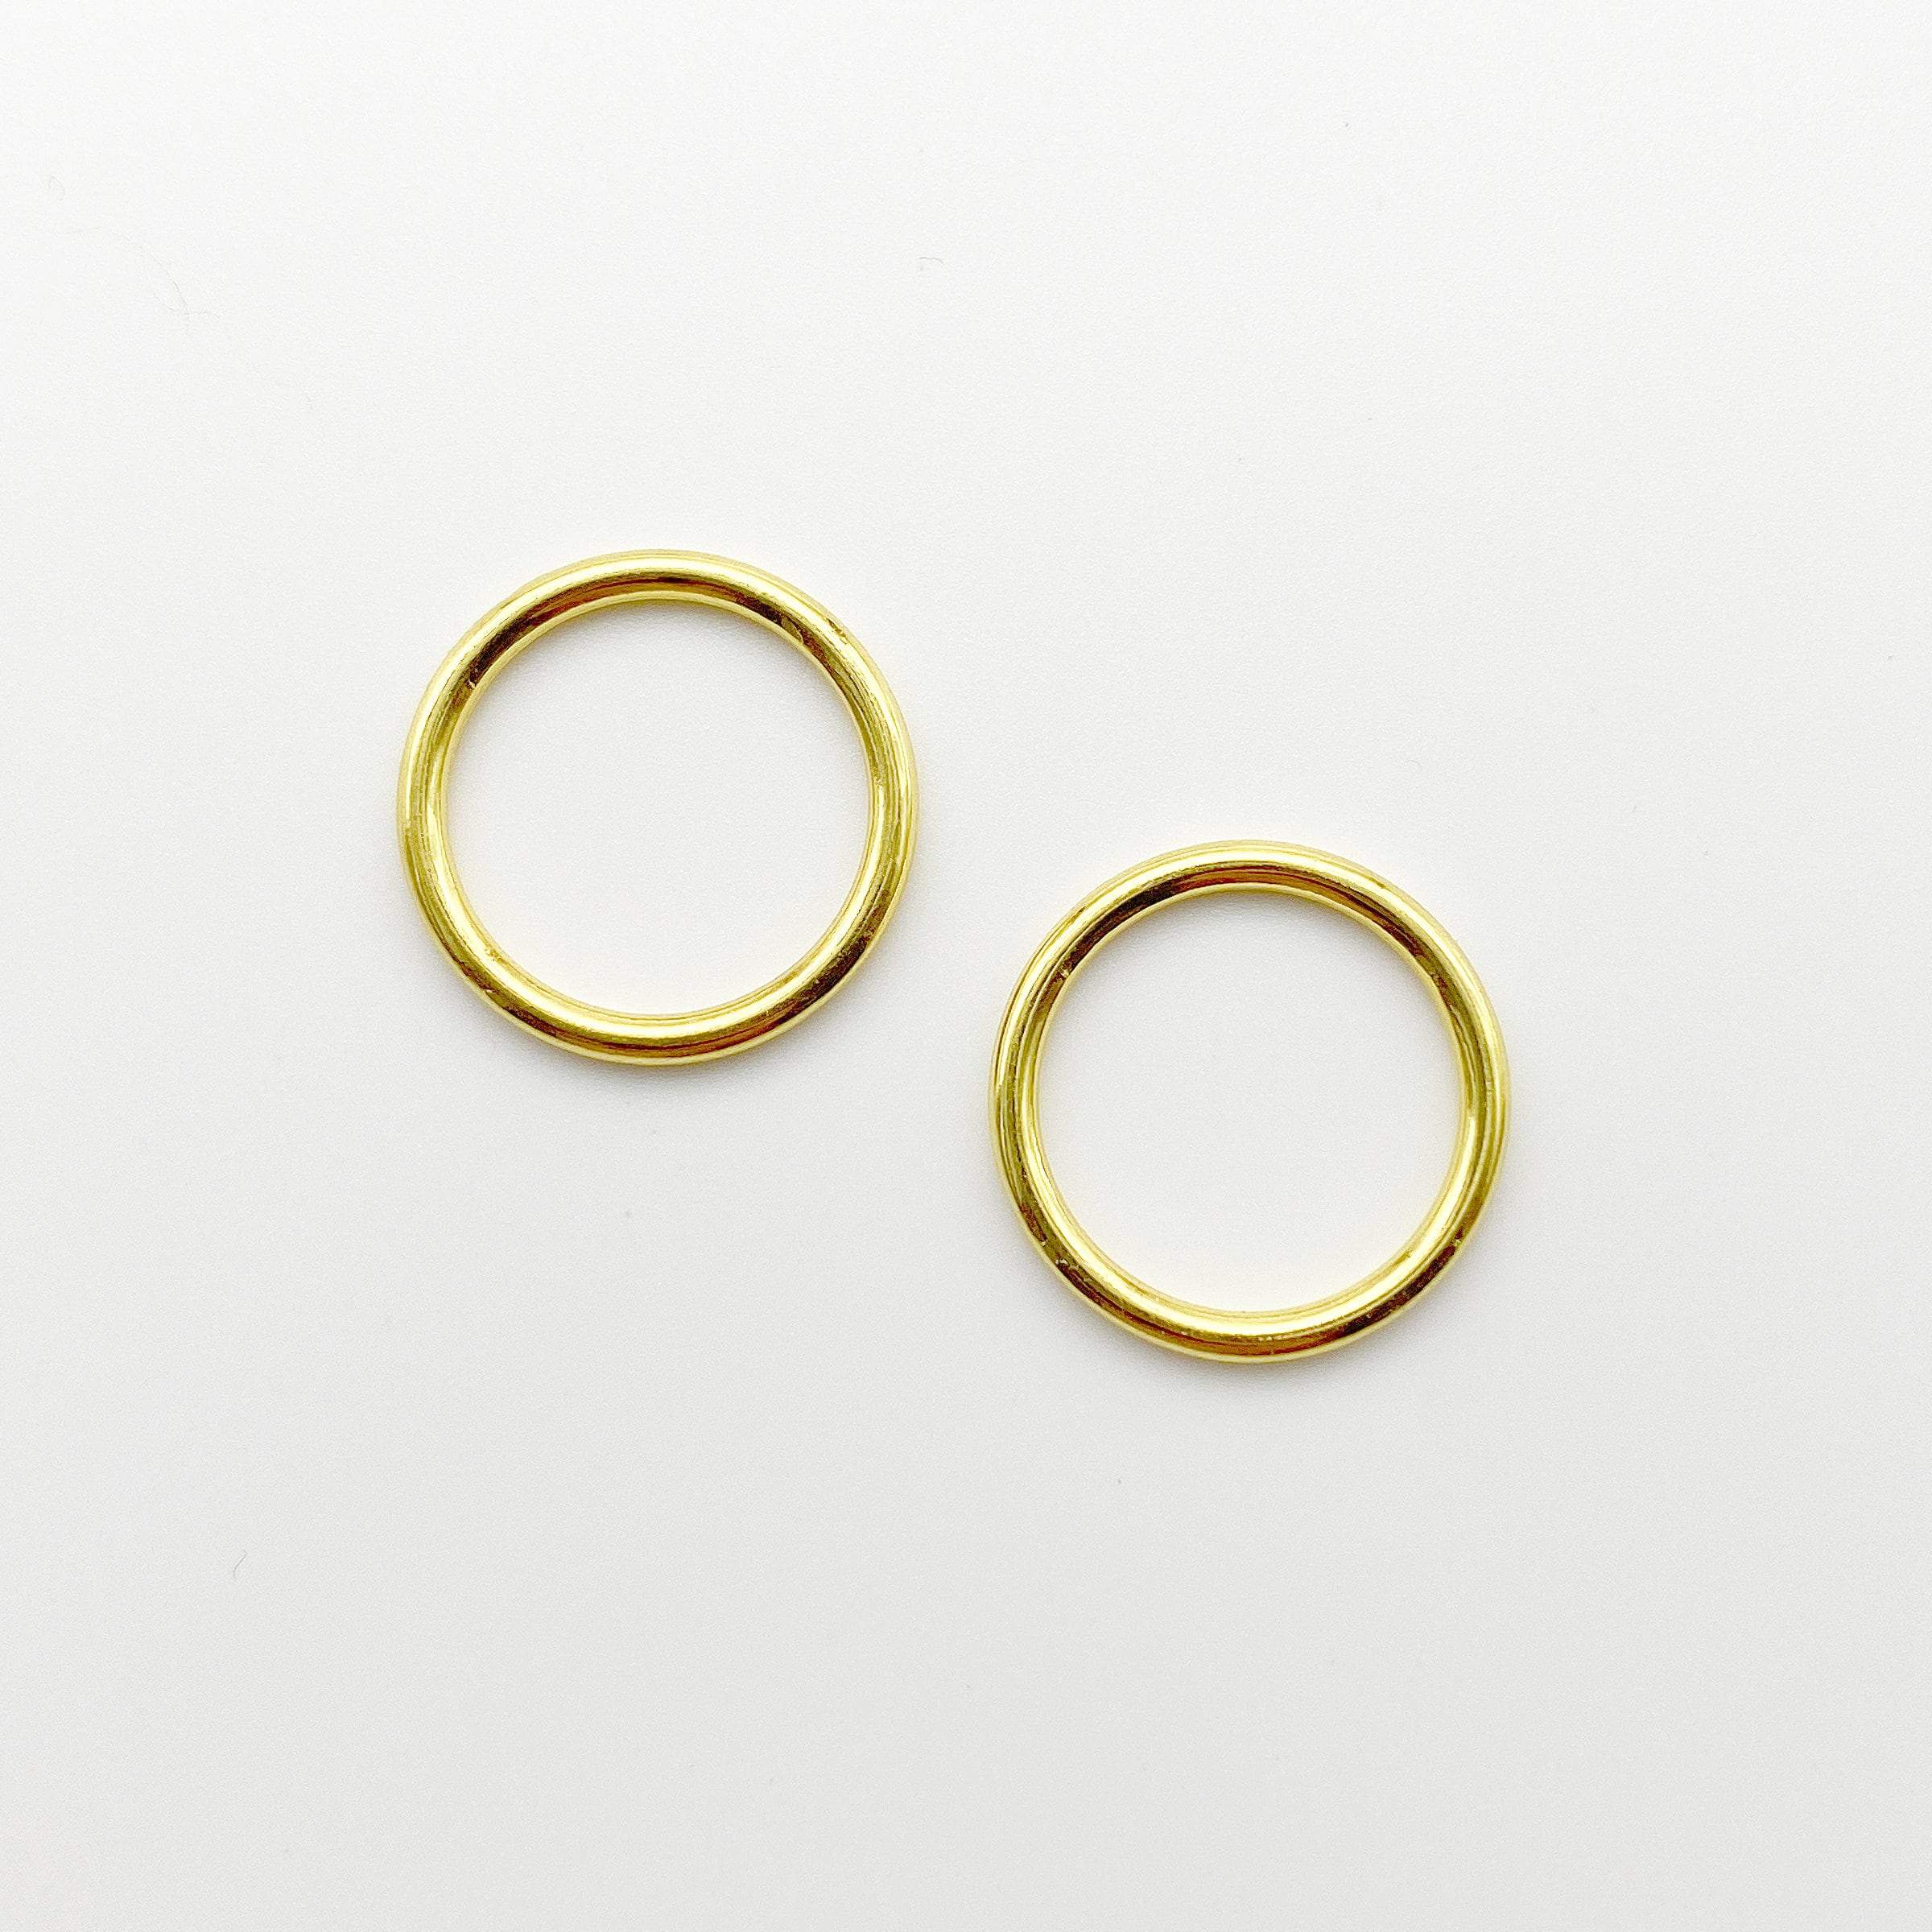 Set of 2 Thicker Rings OR 2 Tall Thick Sliders in Gold for Swimwear or Bra making- 5/16"/8mm, 3/8"/10mm, 1/2"/12mm, 5/8"/15mm-Stitch Love Studio